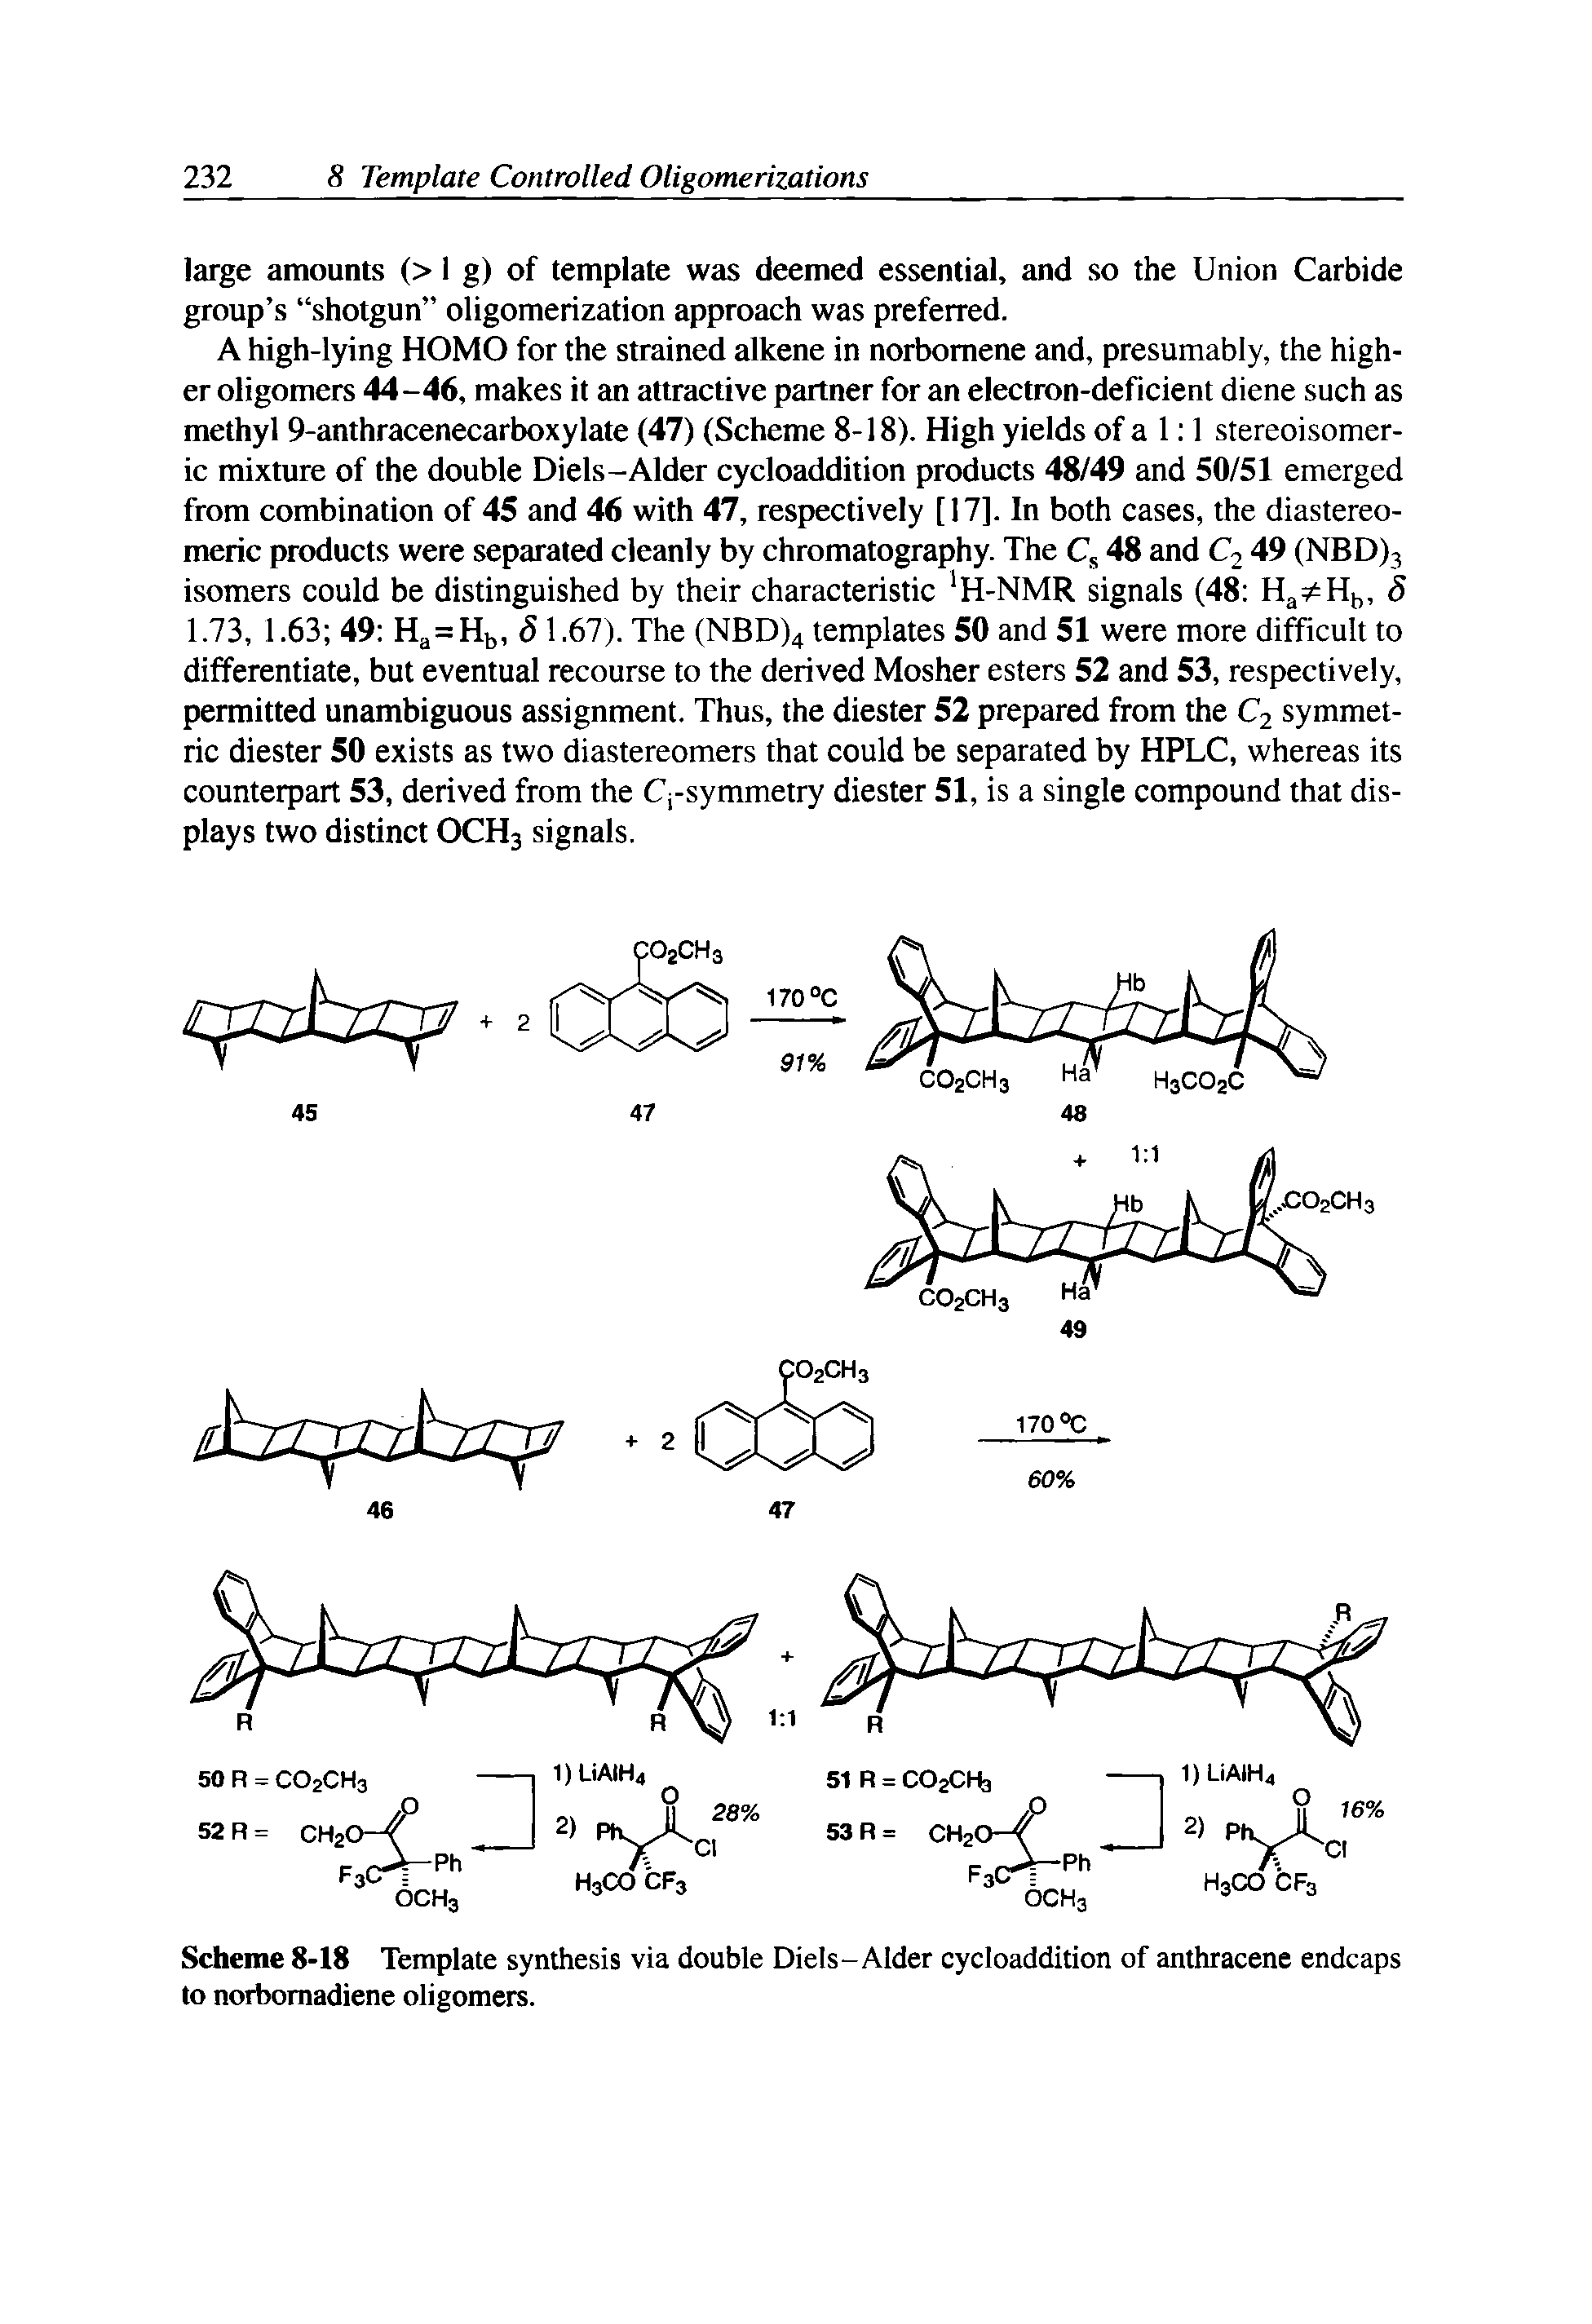 Scheme 8-18 Template synthesis via double Diels-Alder cycloaddition of anthracene endcaps to norbomadiene oligomers.